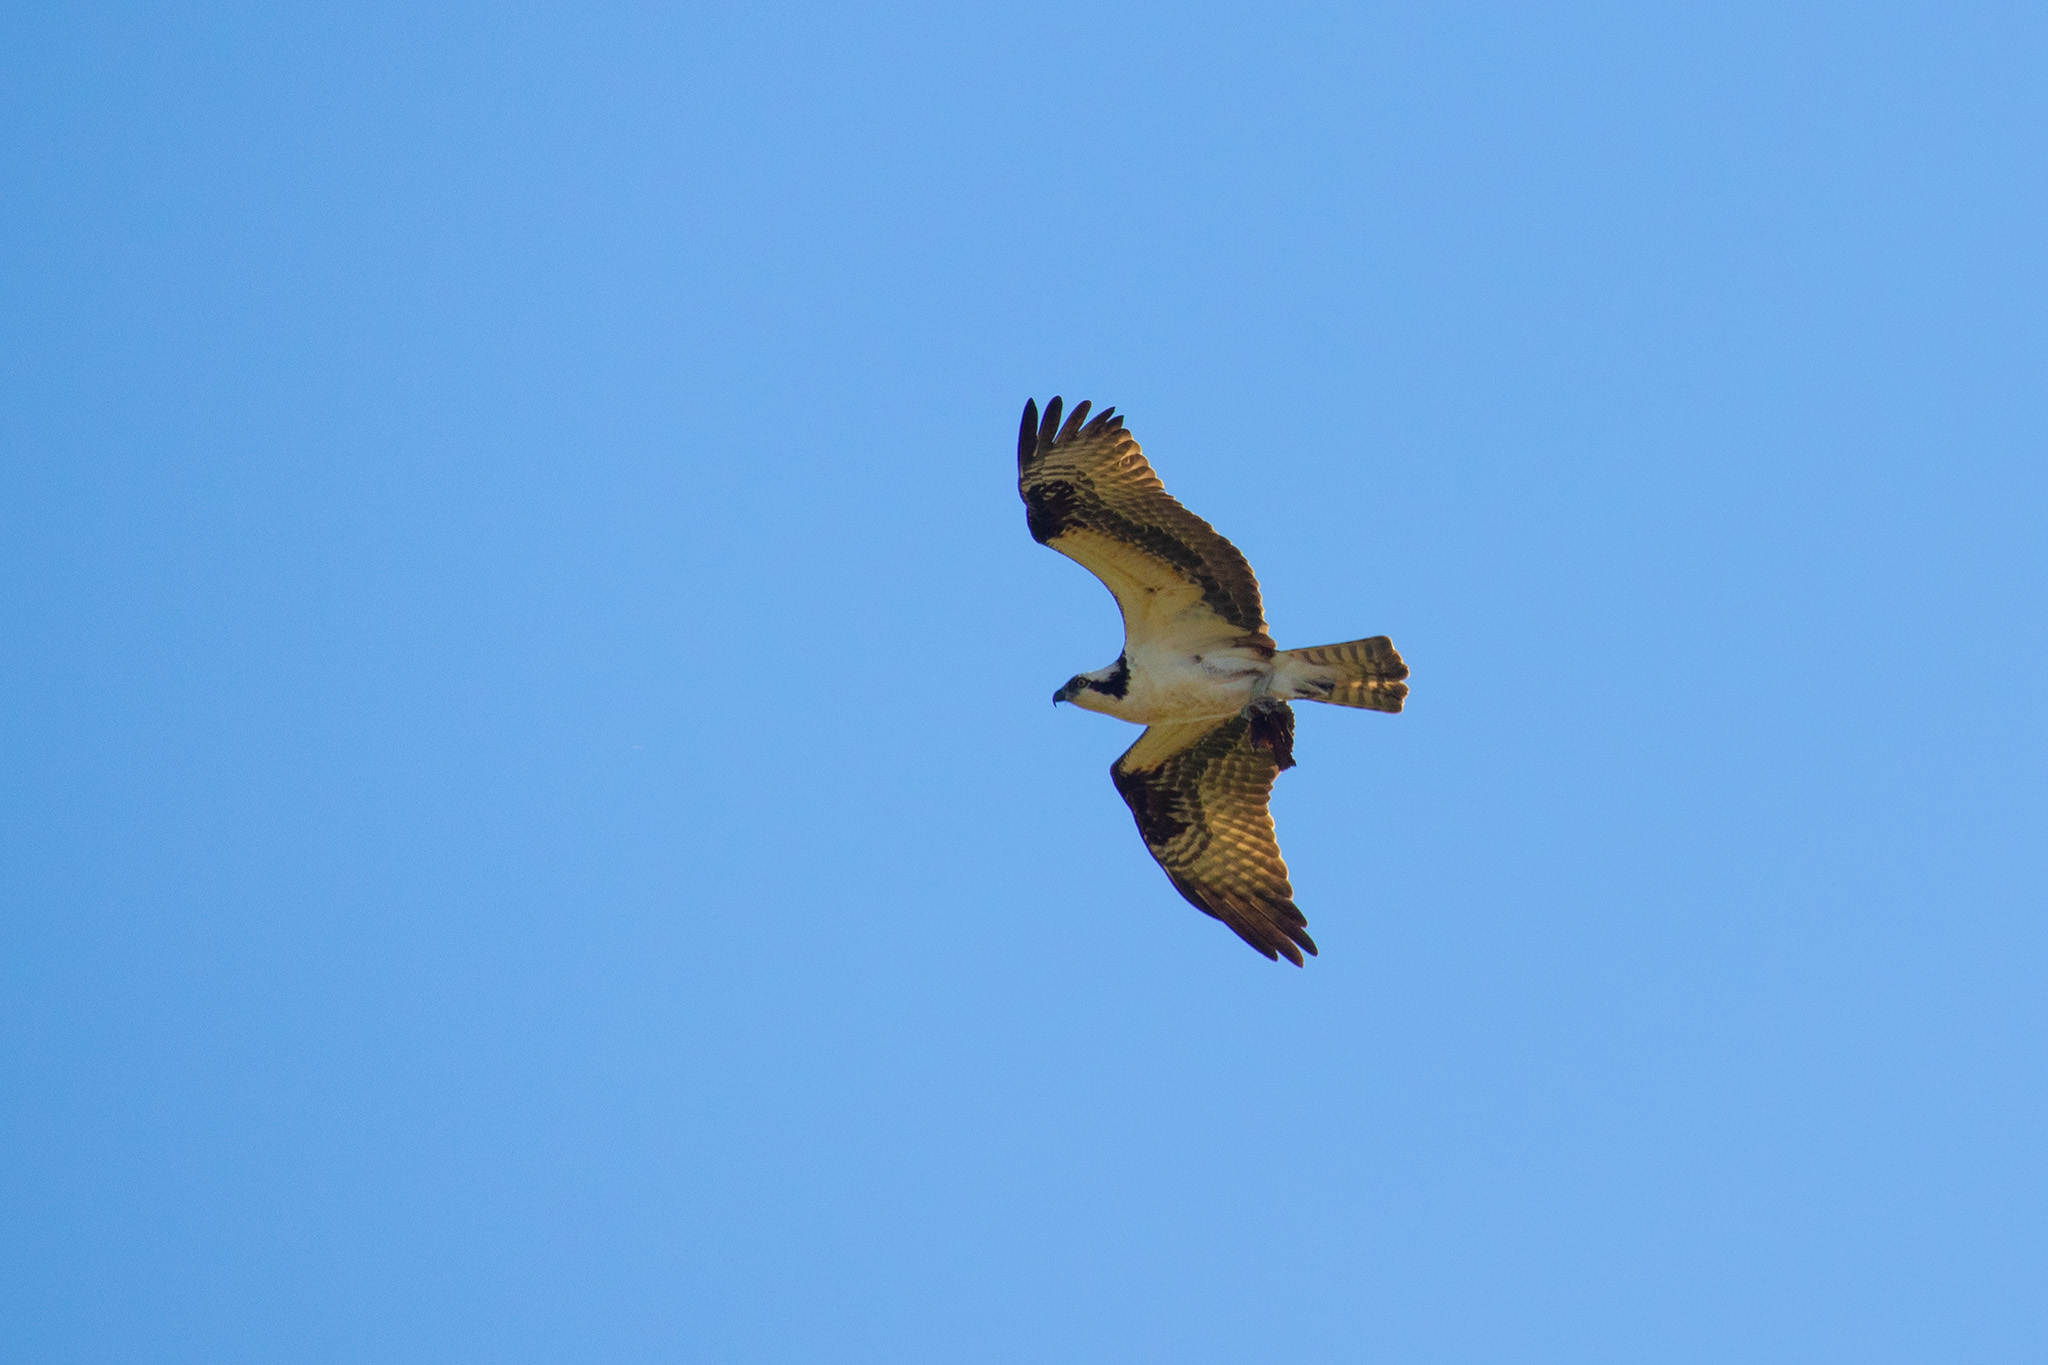 Hawk flying overhead with blue sky behind it